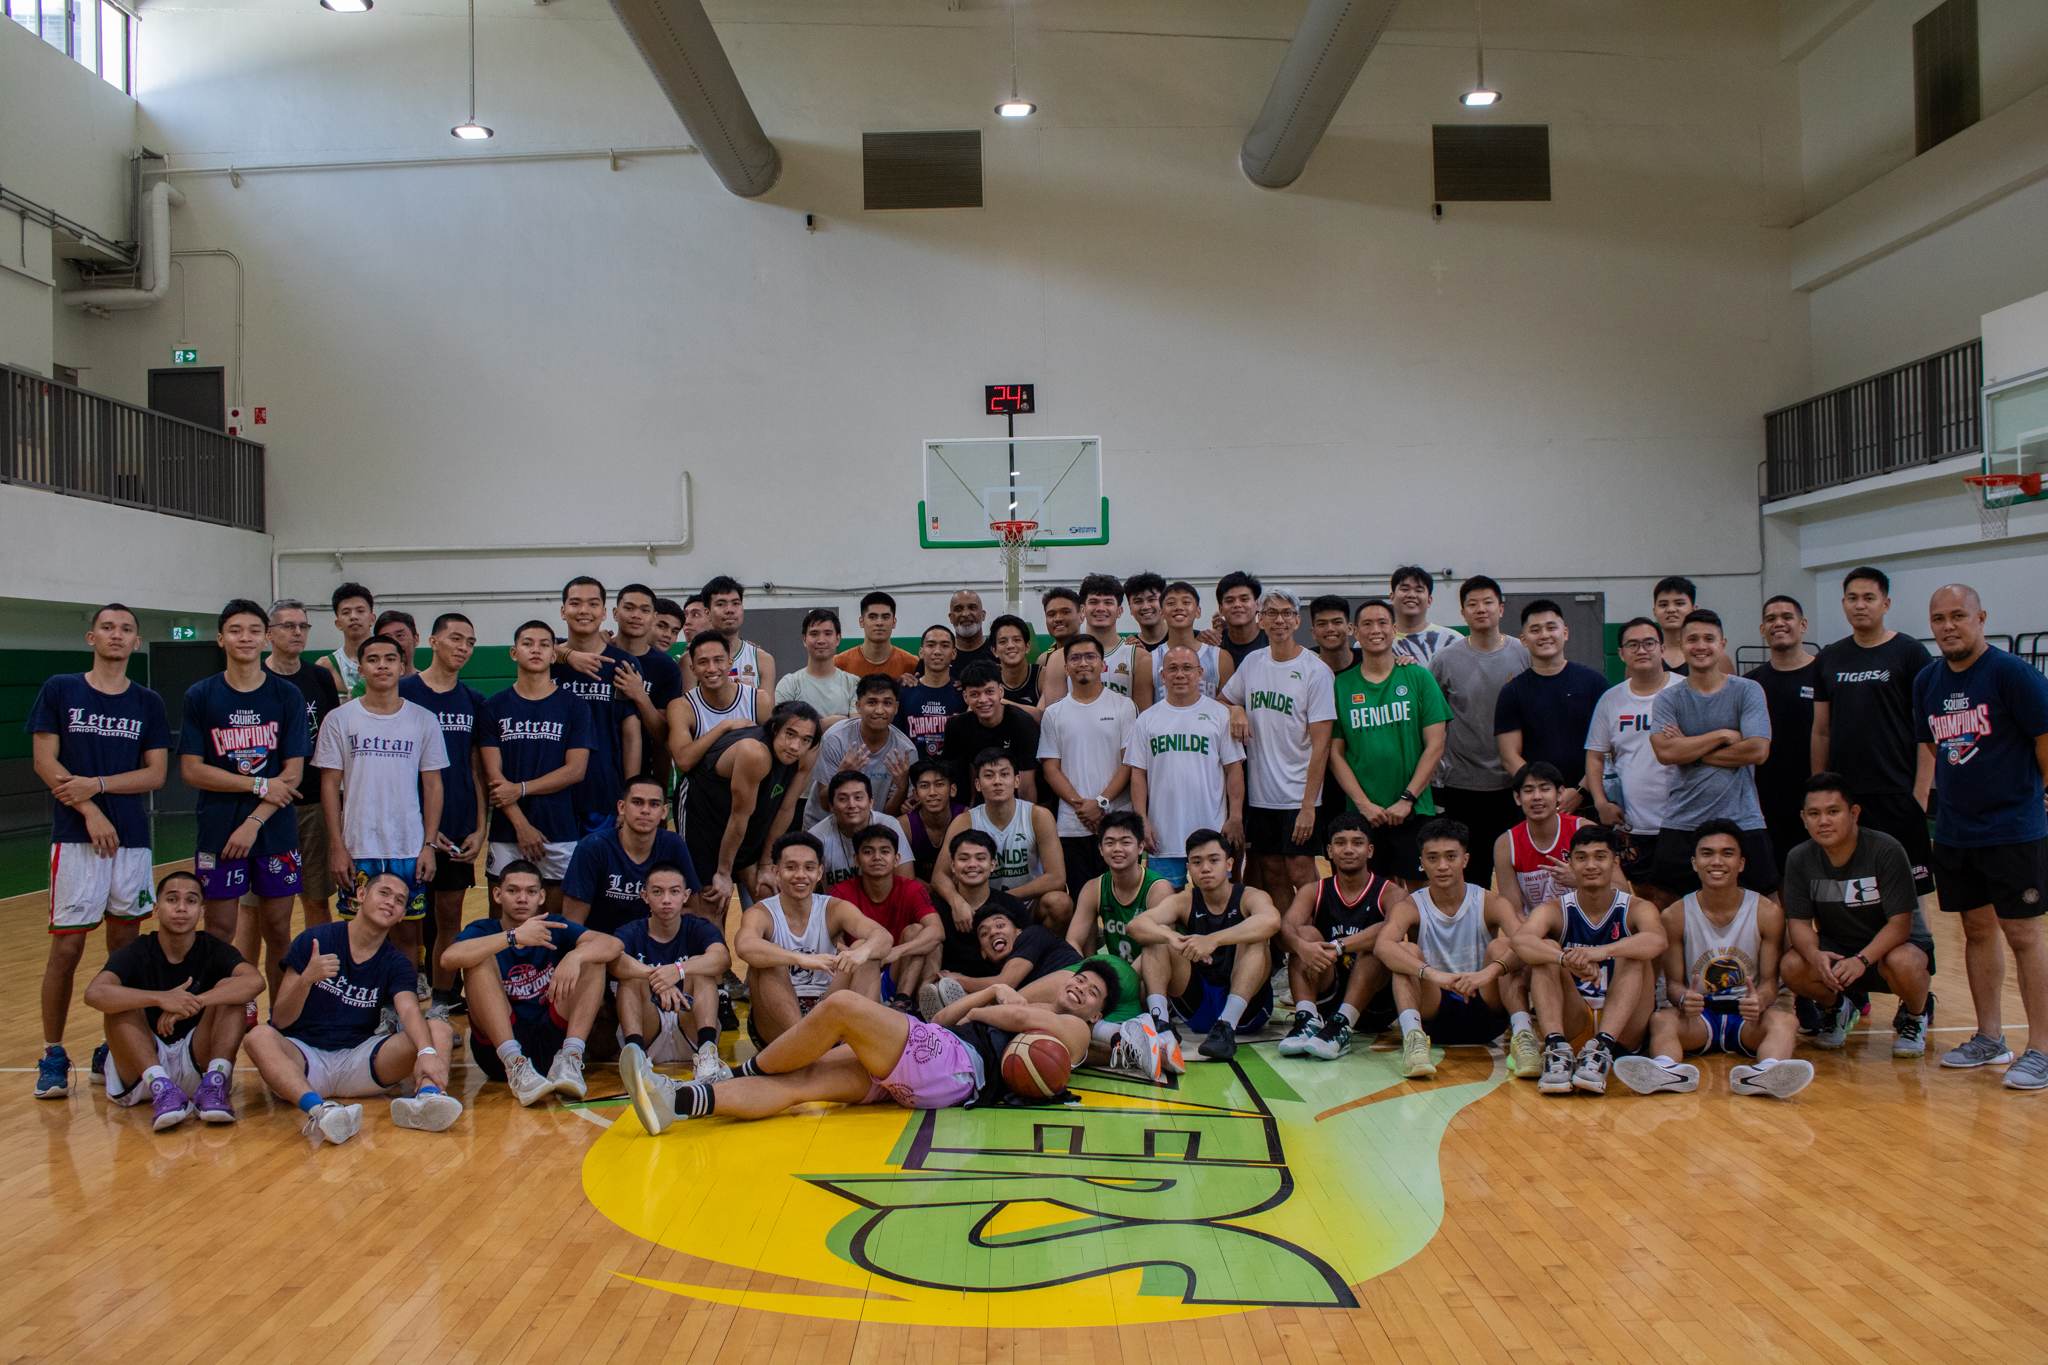 Benilde Blazers, Letran Squires relish 'class' given by Phil Handy